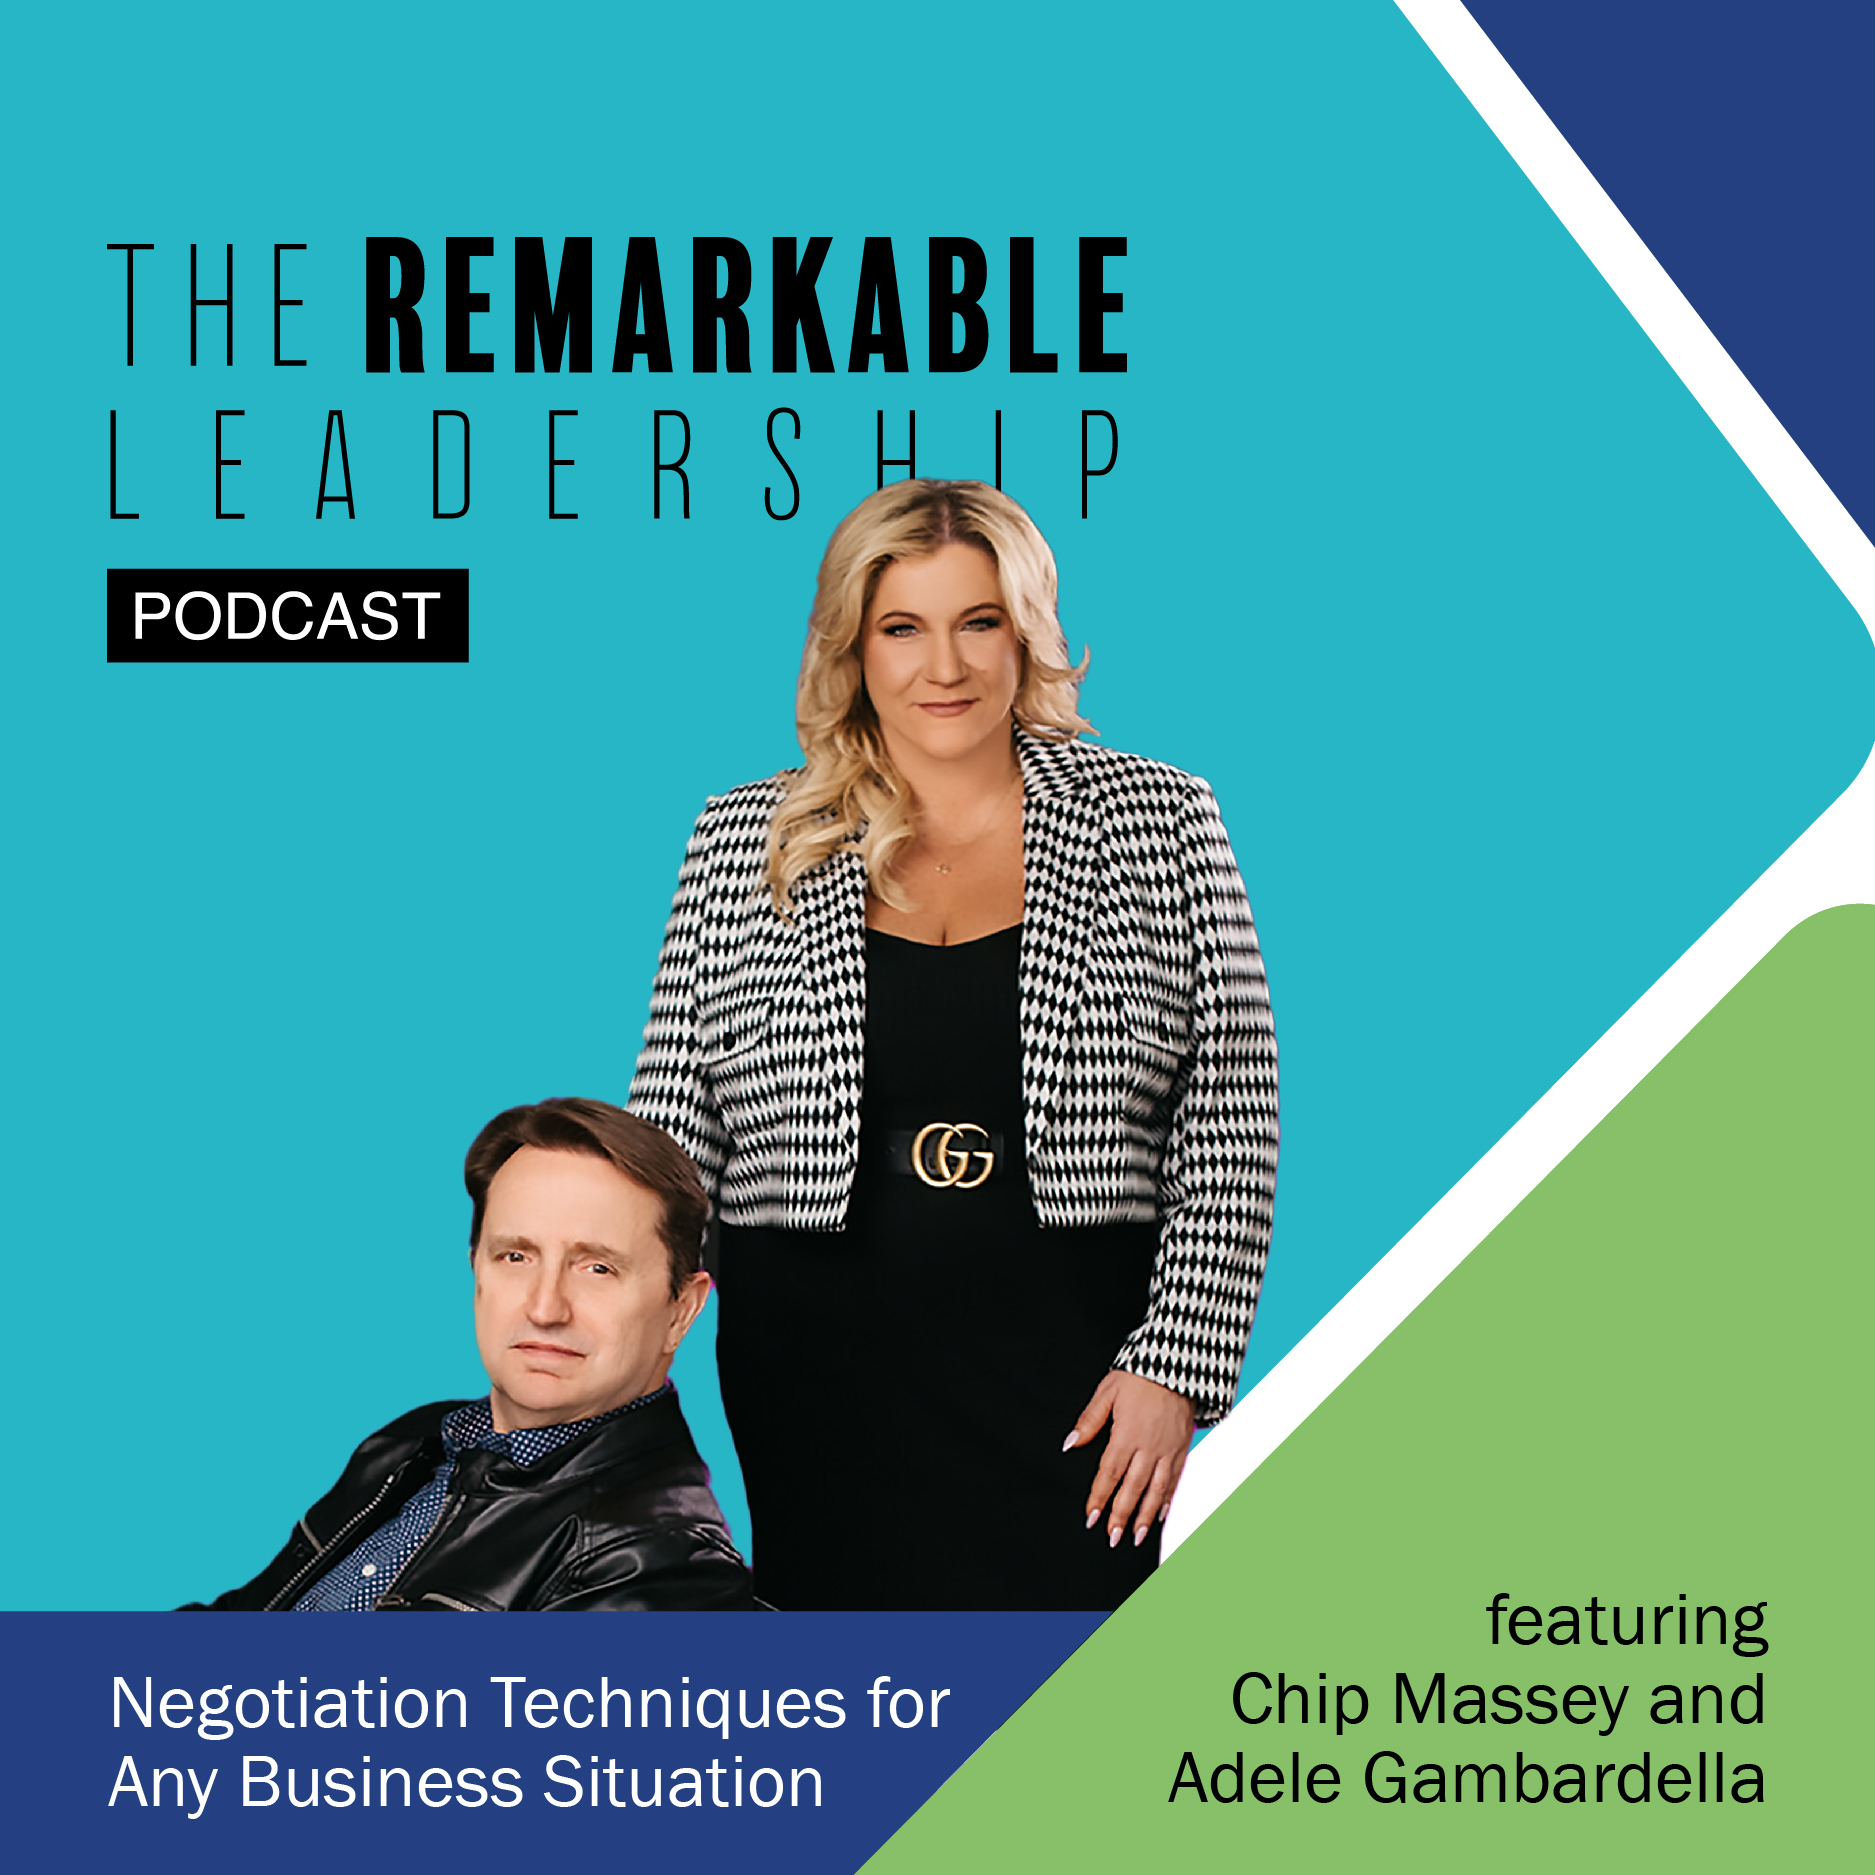 Negotiation Techniques for Any Business Situation with Chip Massey and Adele Gambardella